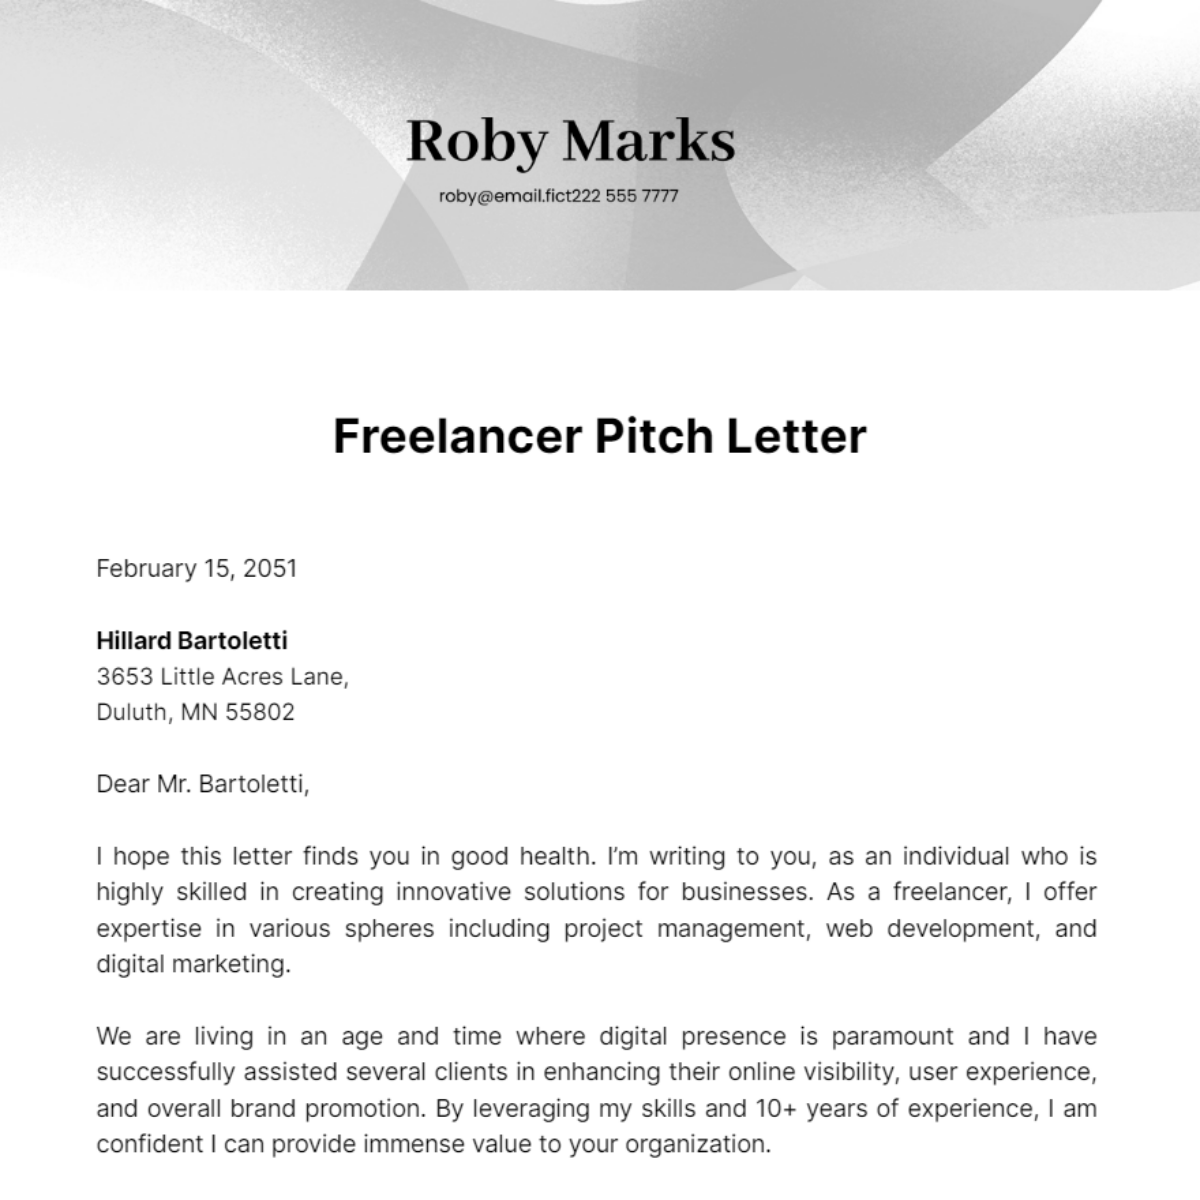 Freelancer Pitch Letter Template